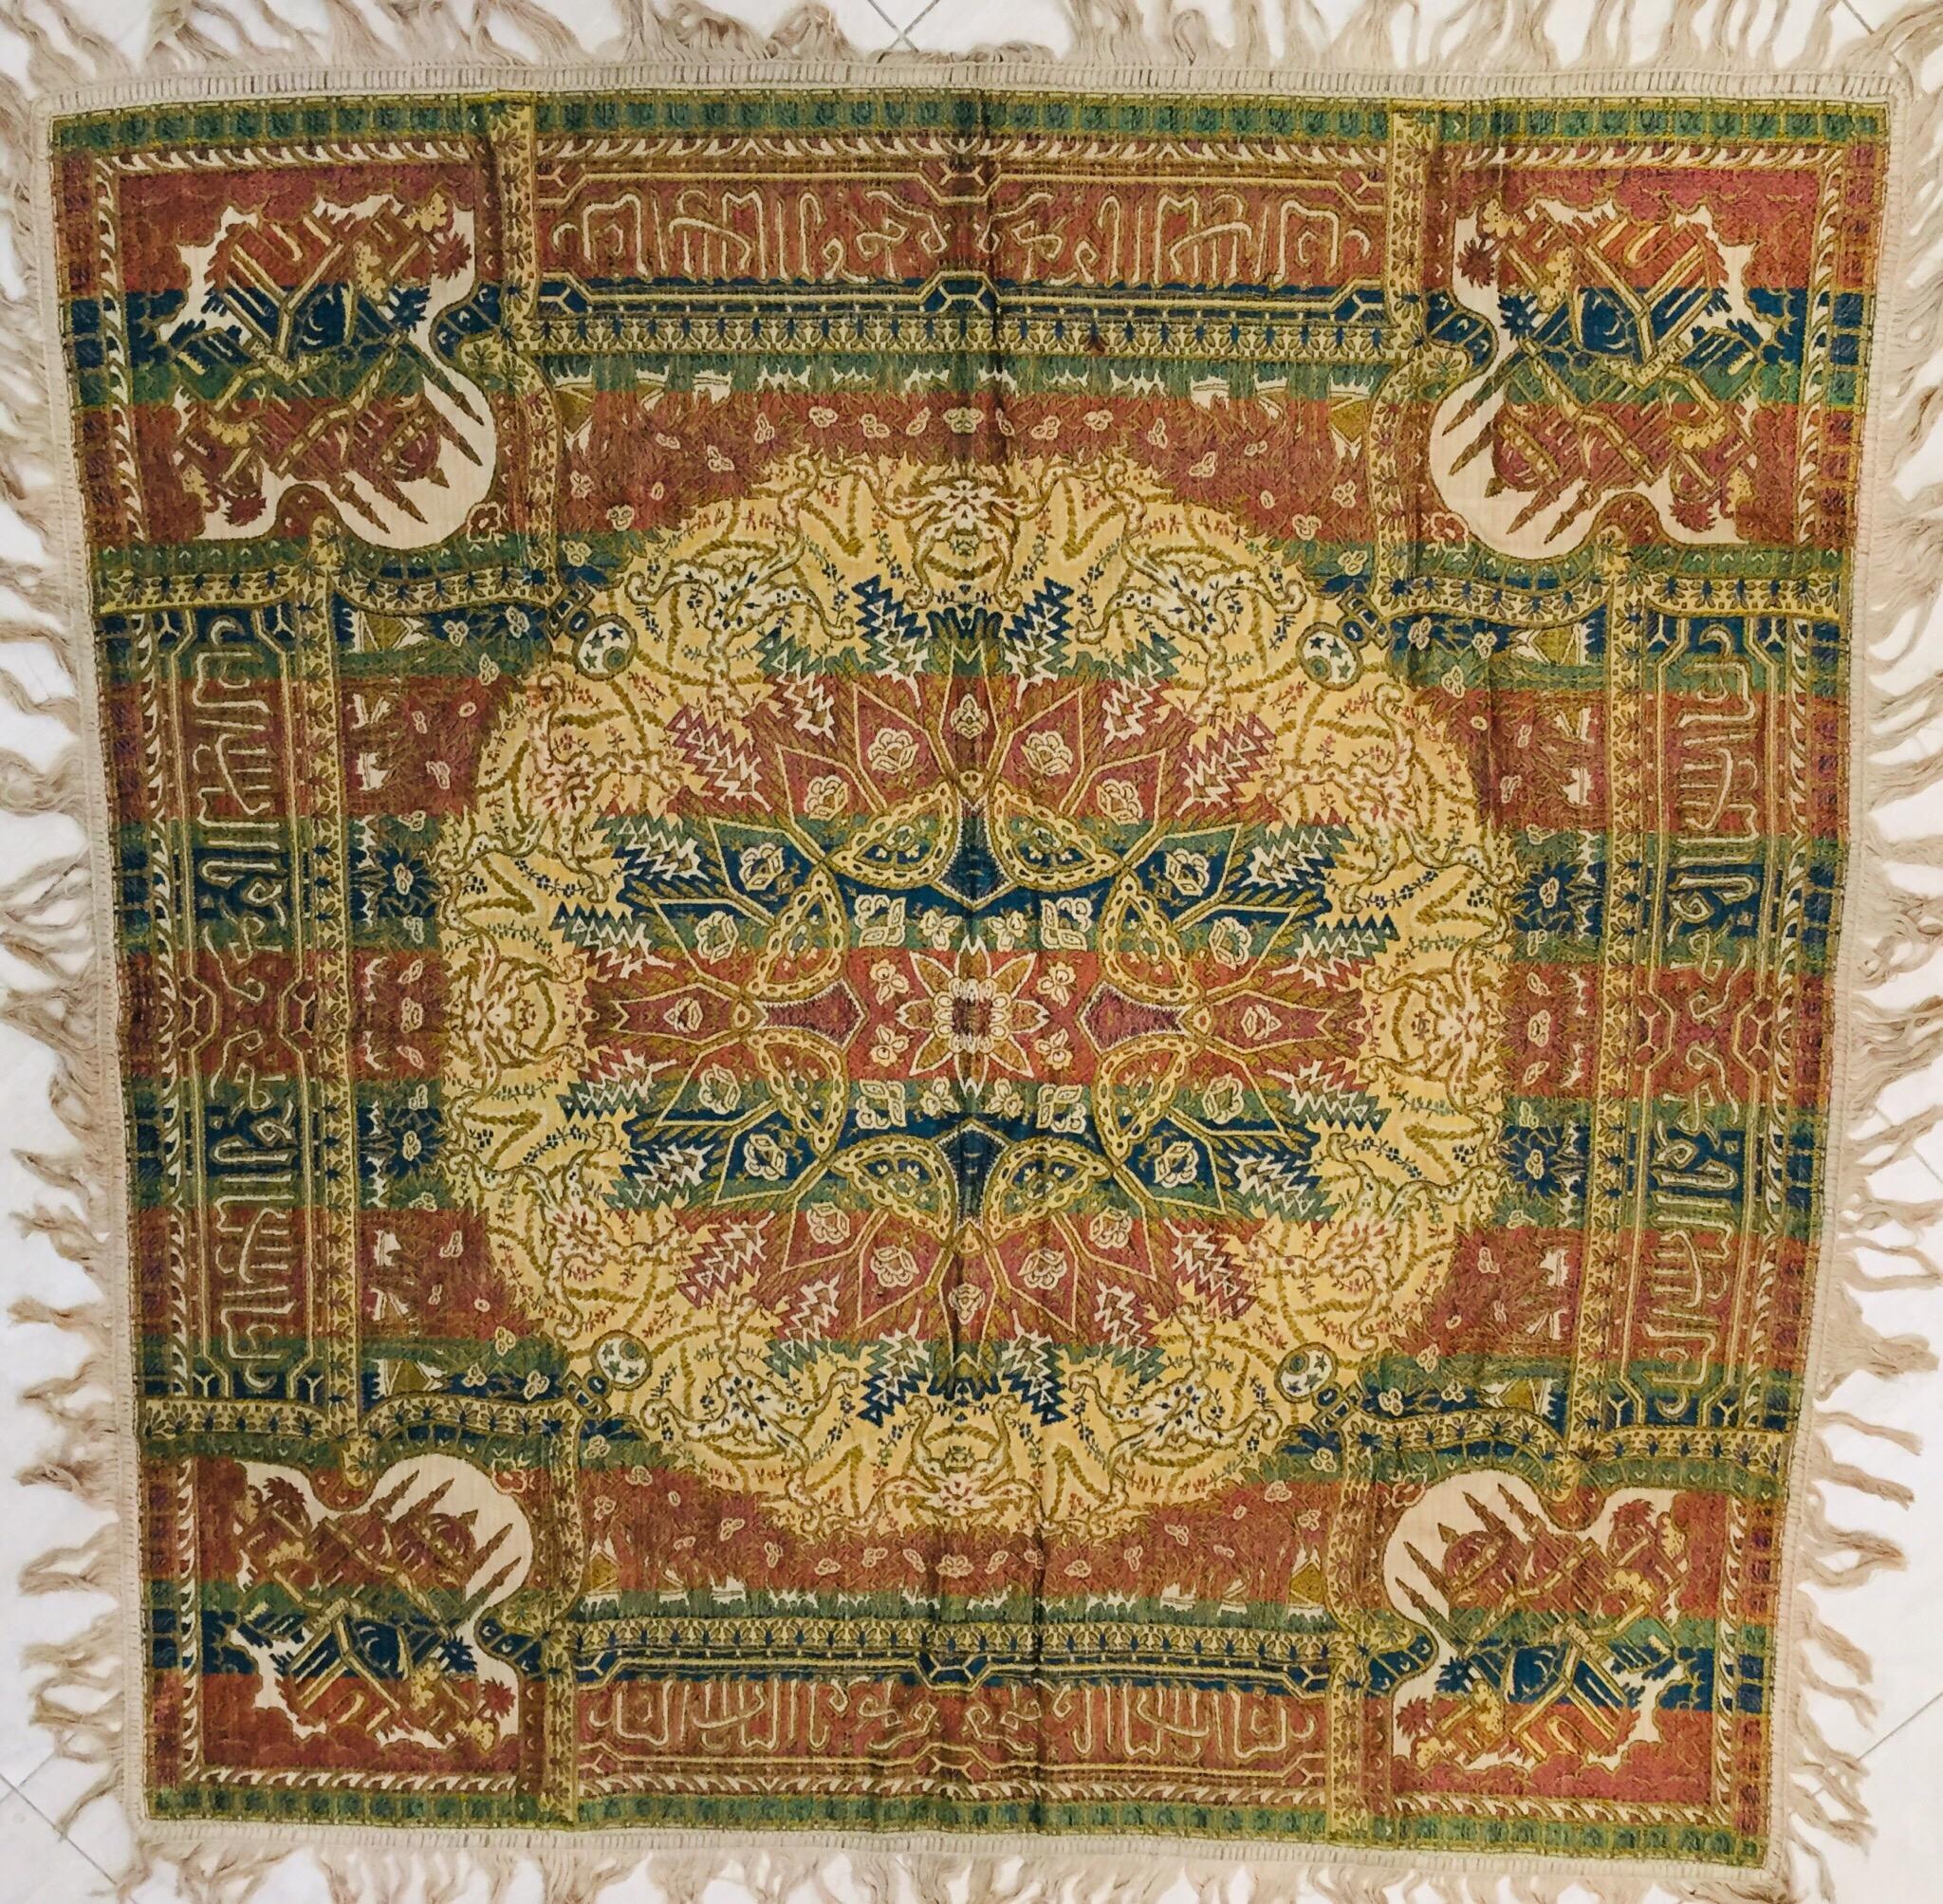 Granada Islamic Spain Textile with Arabic Calligraphy Writing For Sale ...